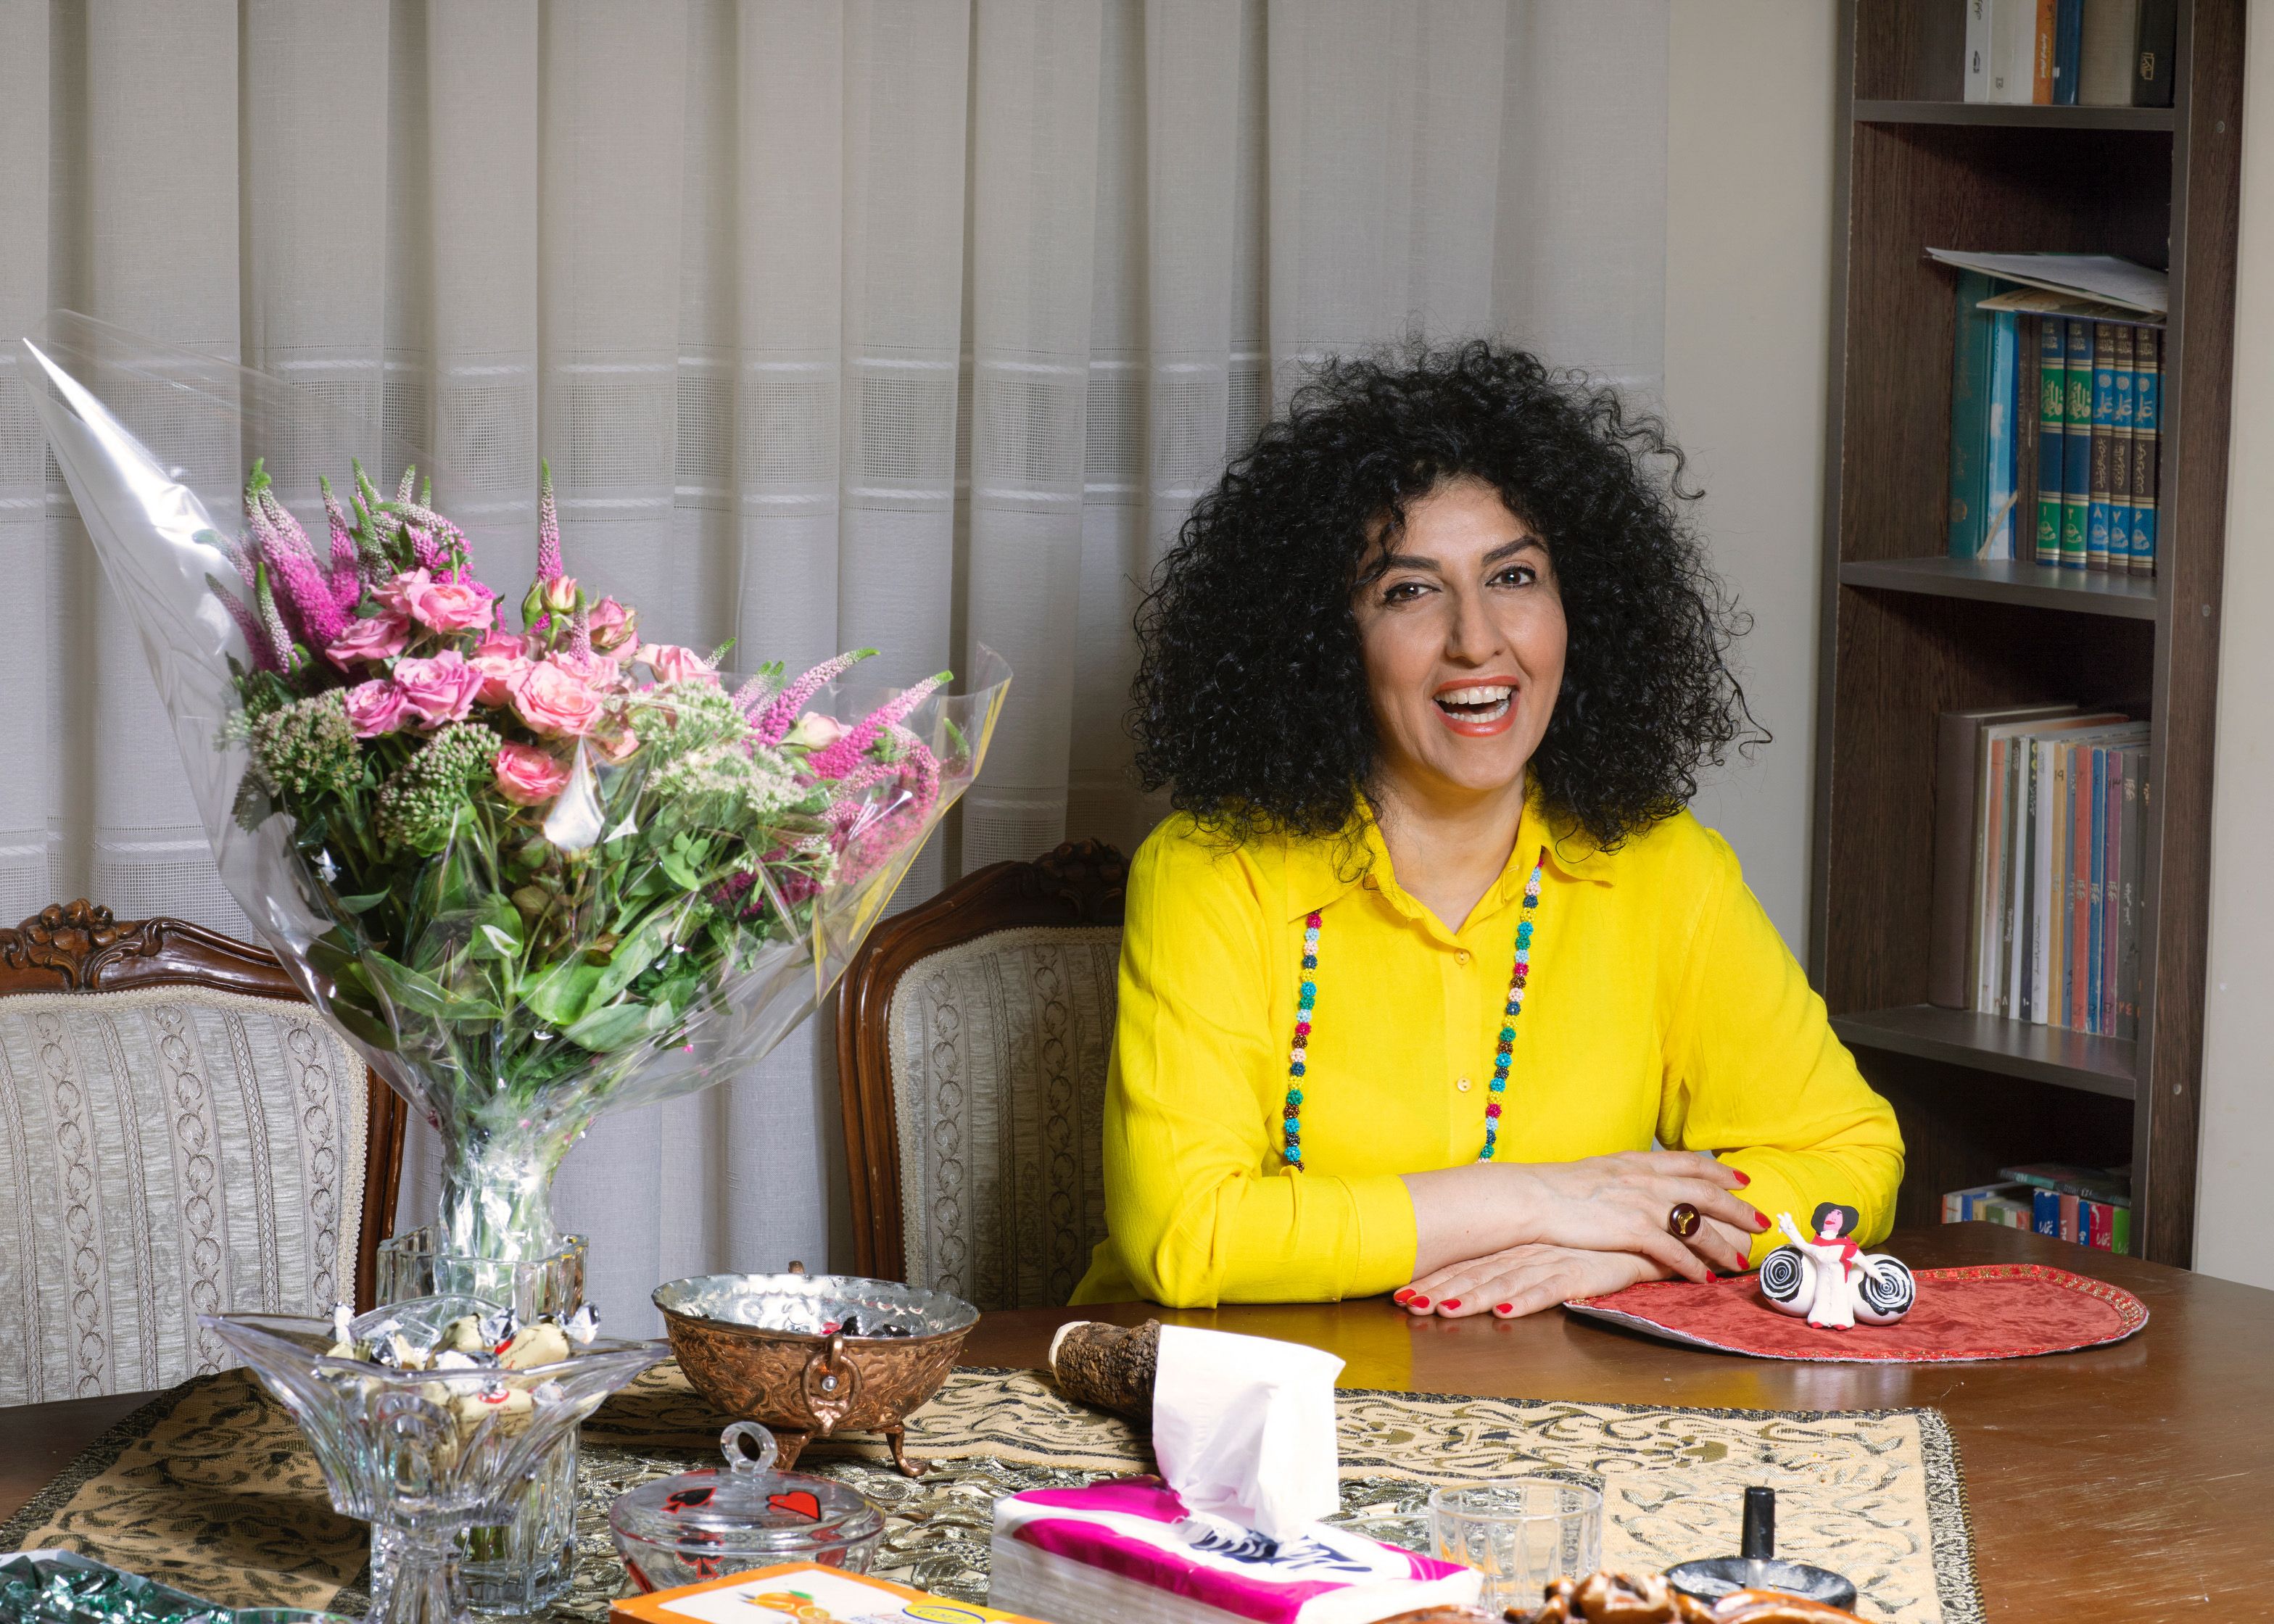 Narges Mohammadi sits at a wooden table beside a bouquet of pink flowers. She wears a bright yellow blouse and smiles broadly. 